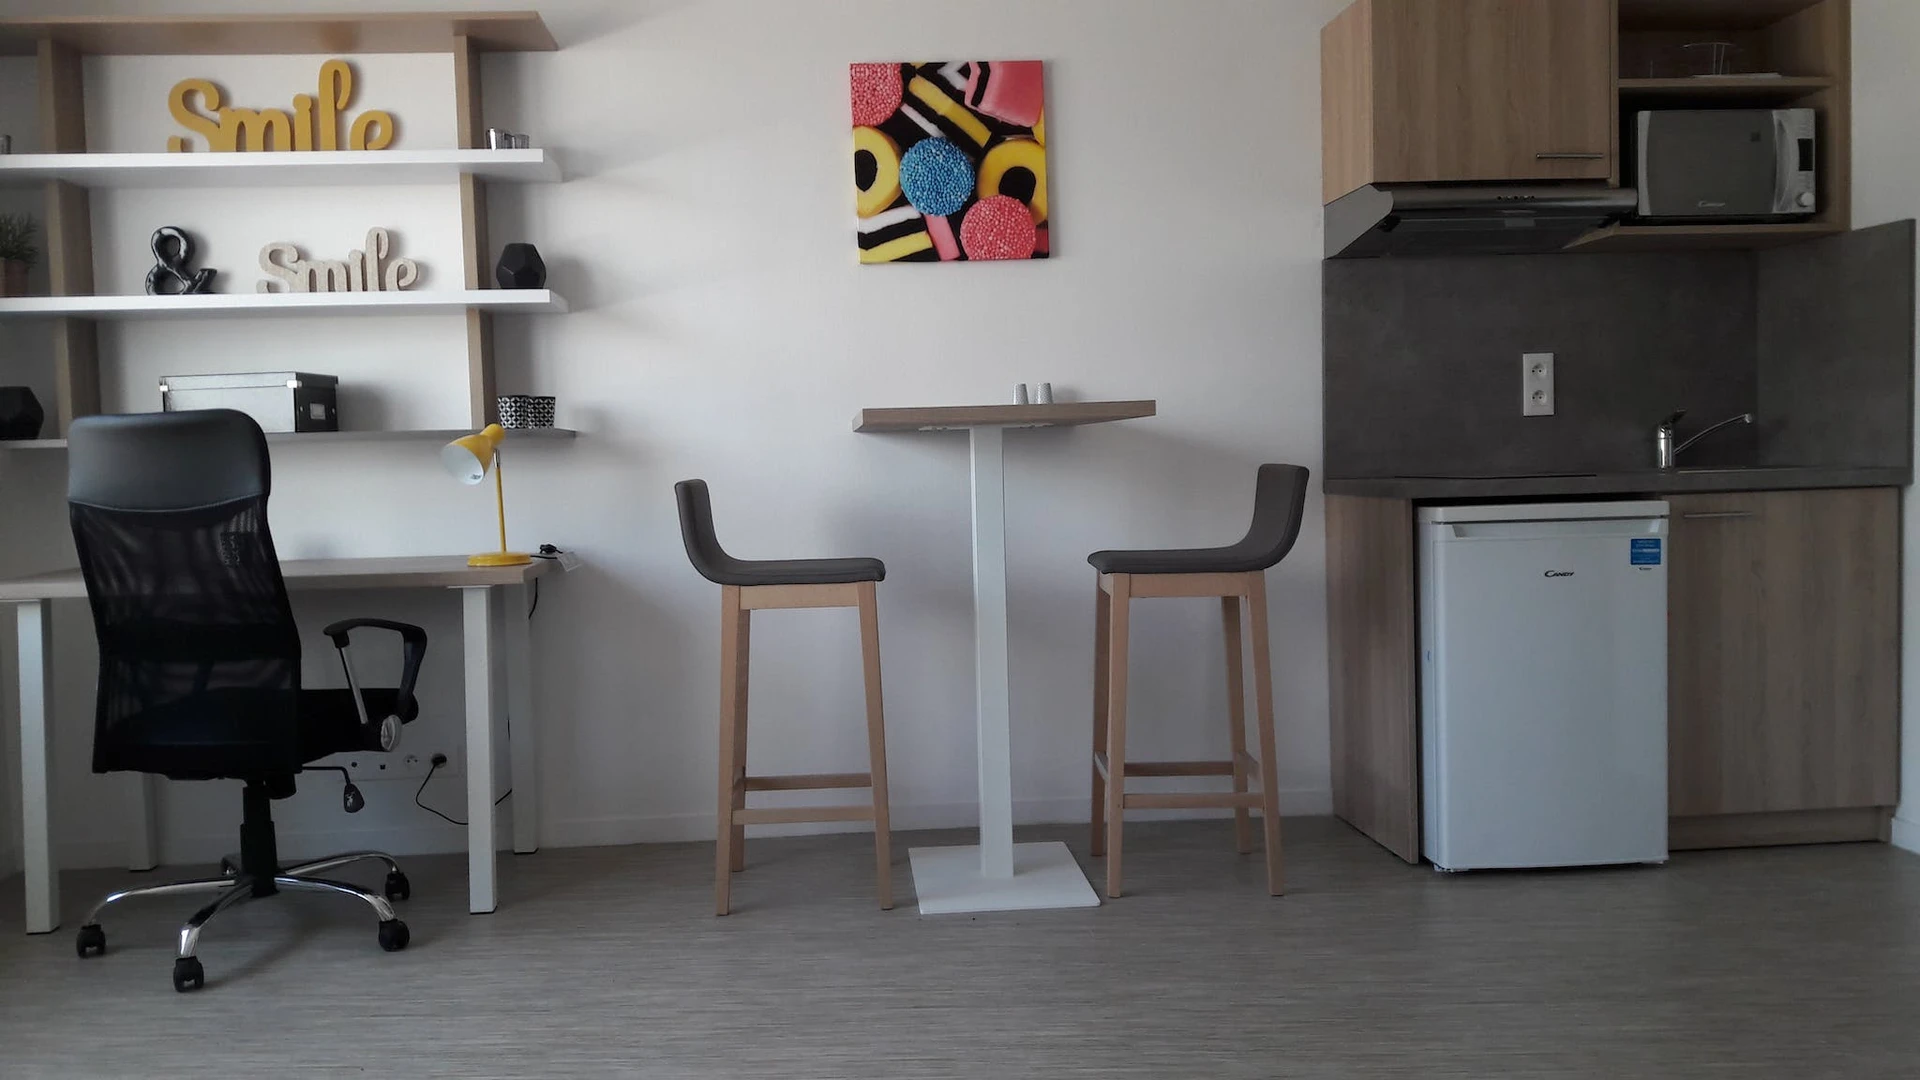 Two bedroom accommodation in Grenoble